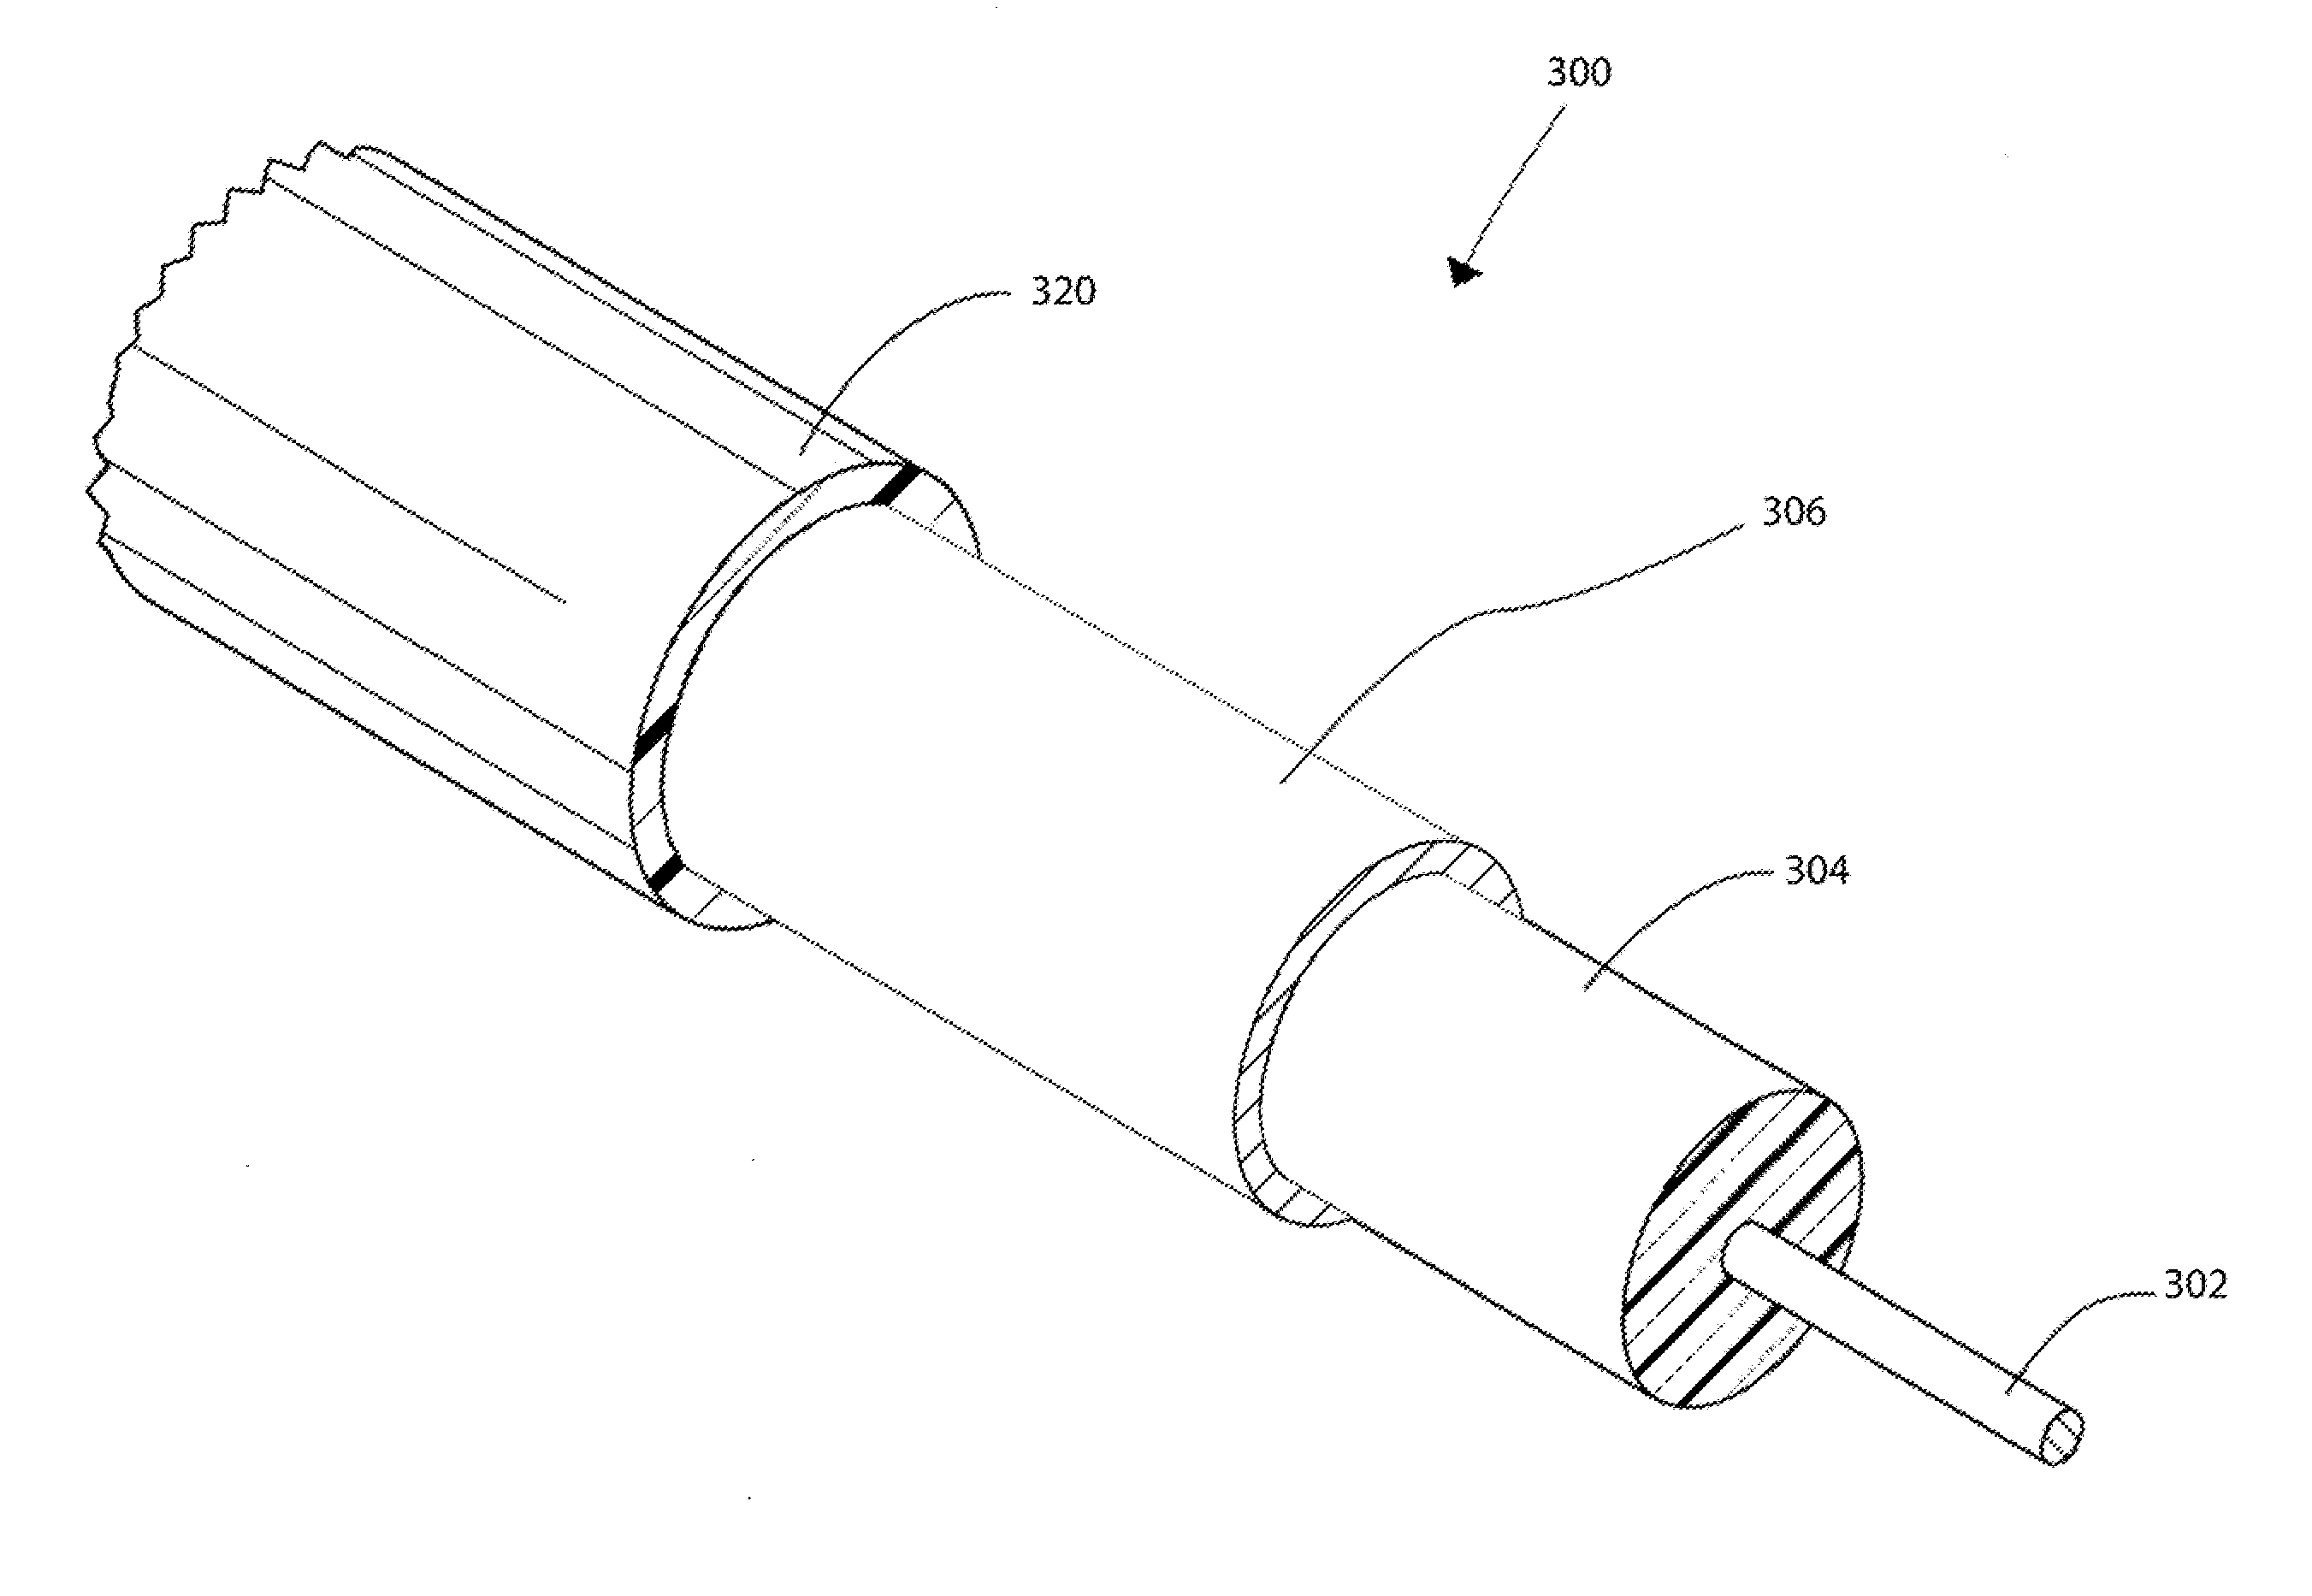 Conductive elastomer and method of applying a conductive coating to a cable